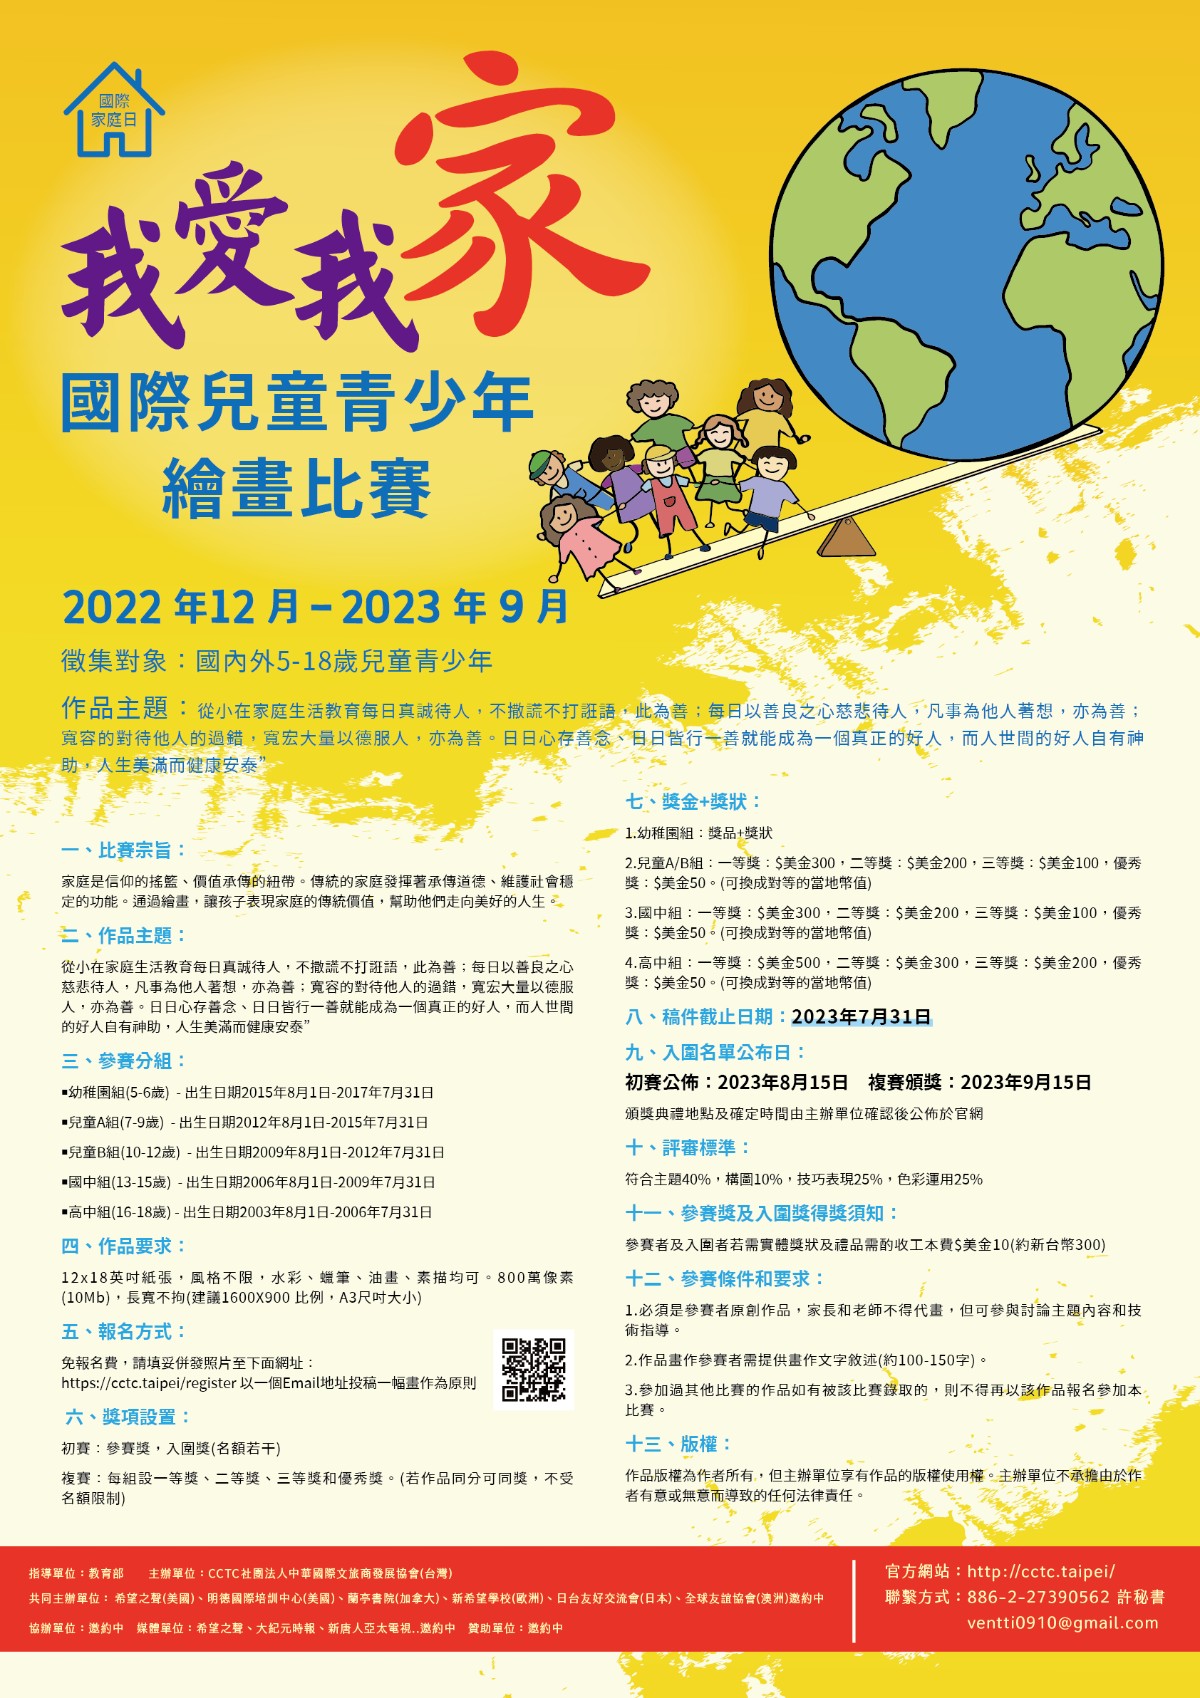 2023 CCTC International Youth and Children Drawing Competition